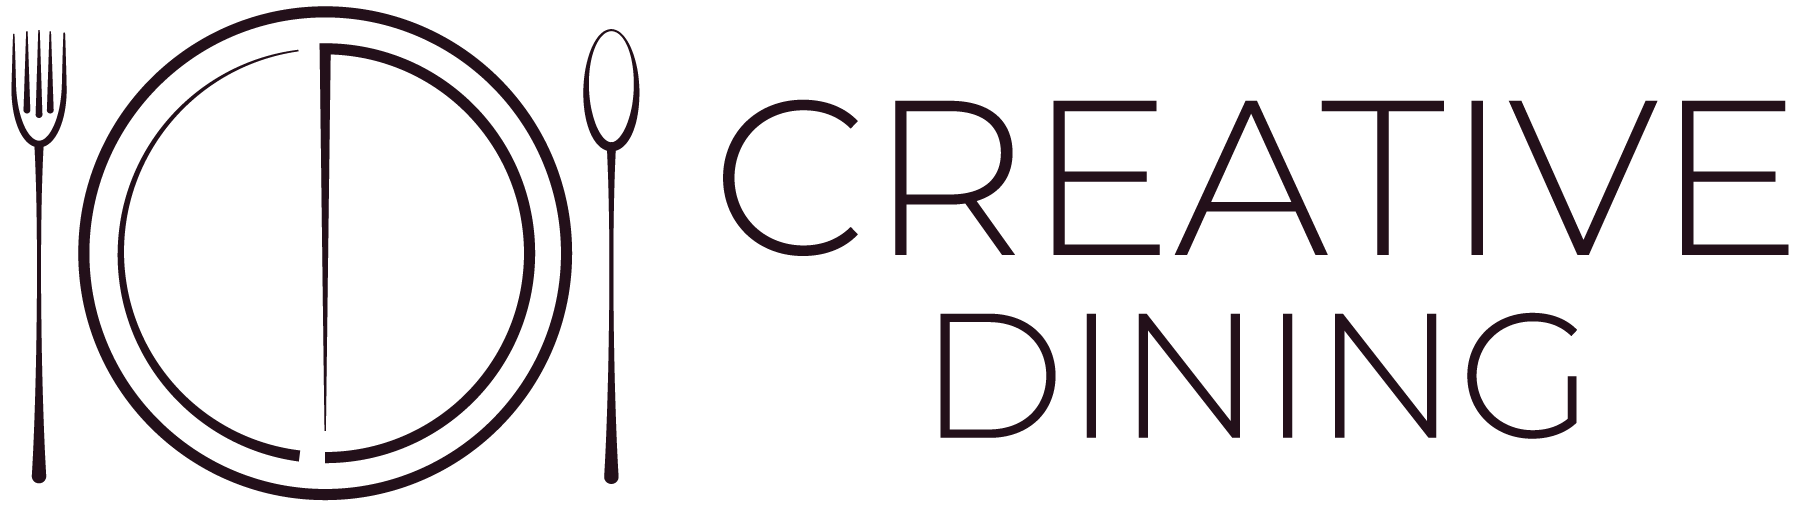 Creative Dining Group